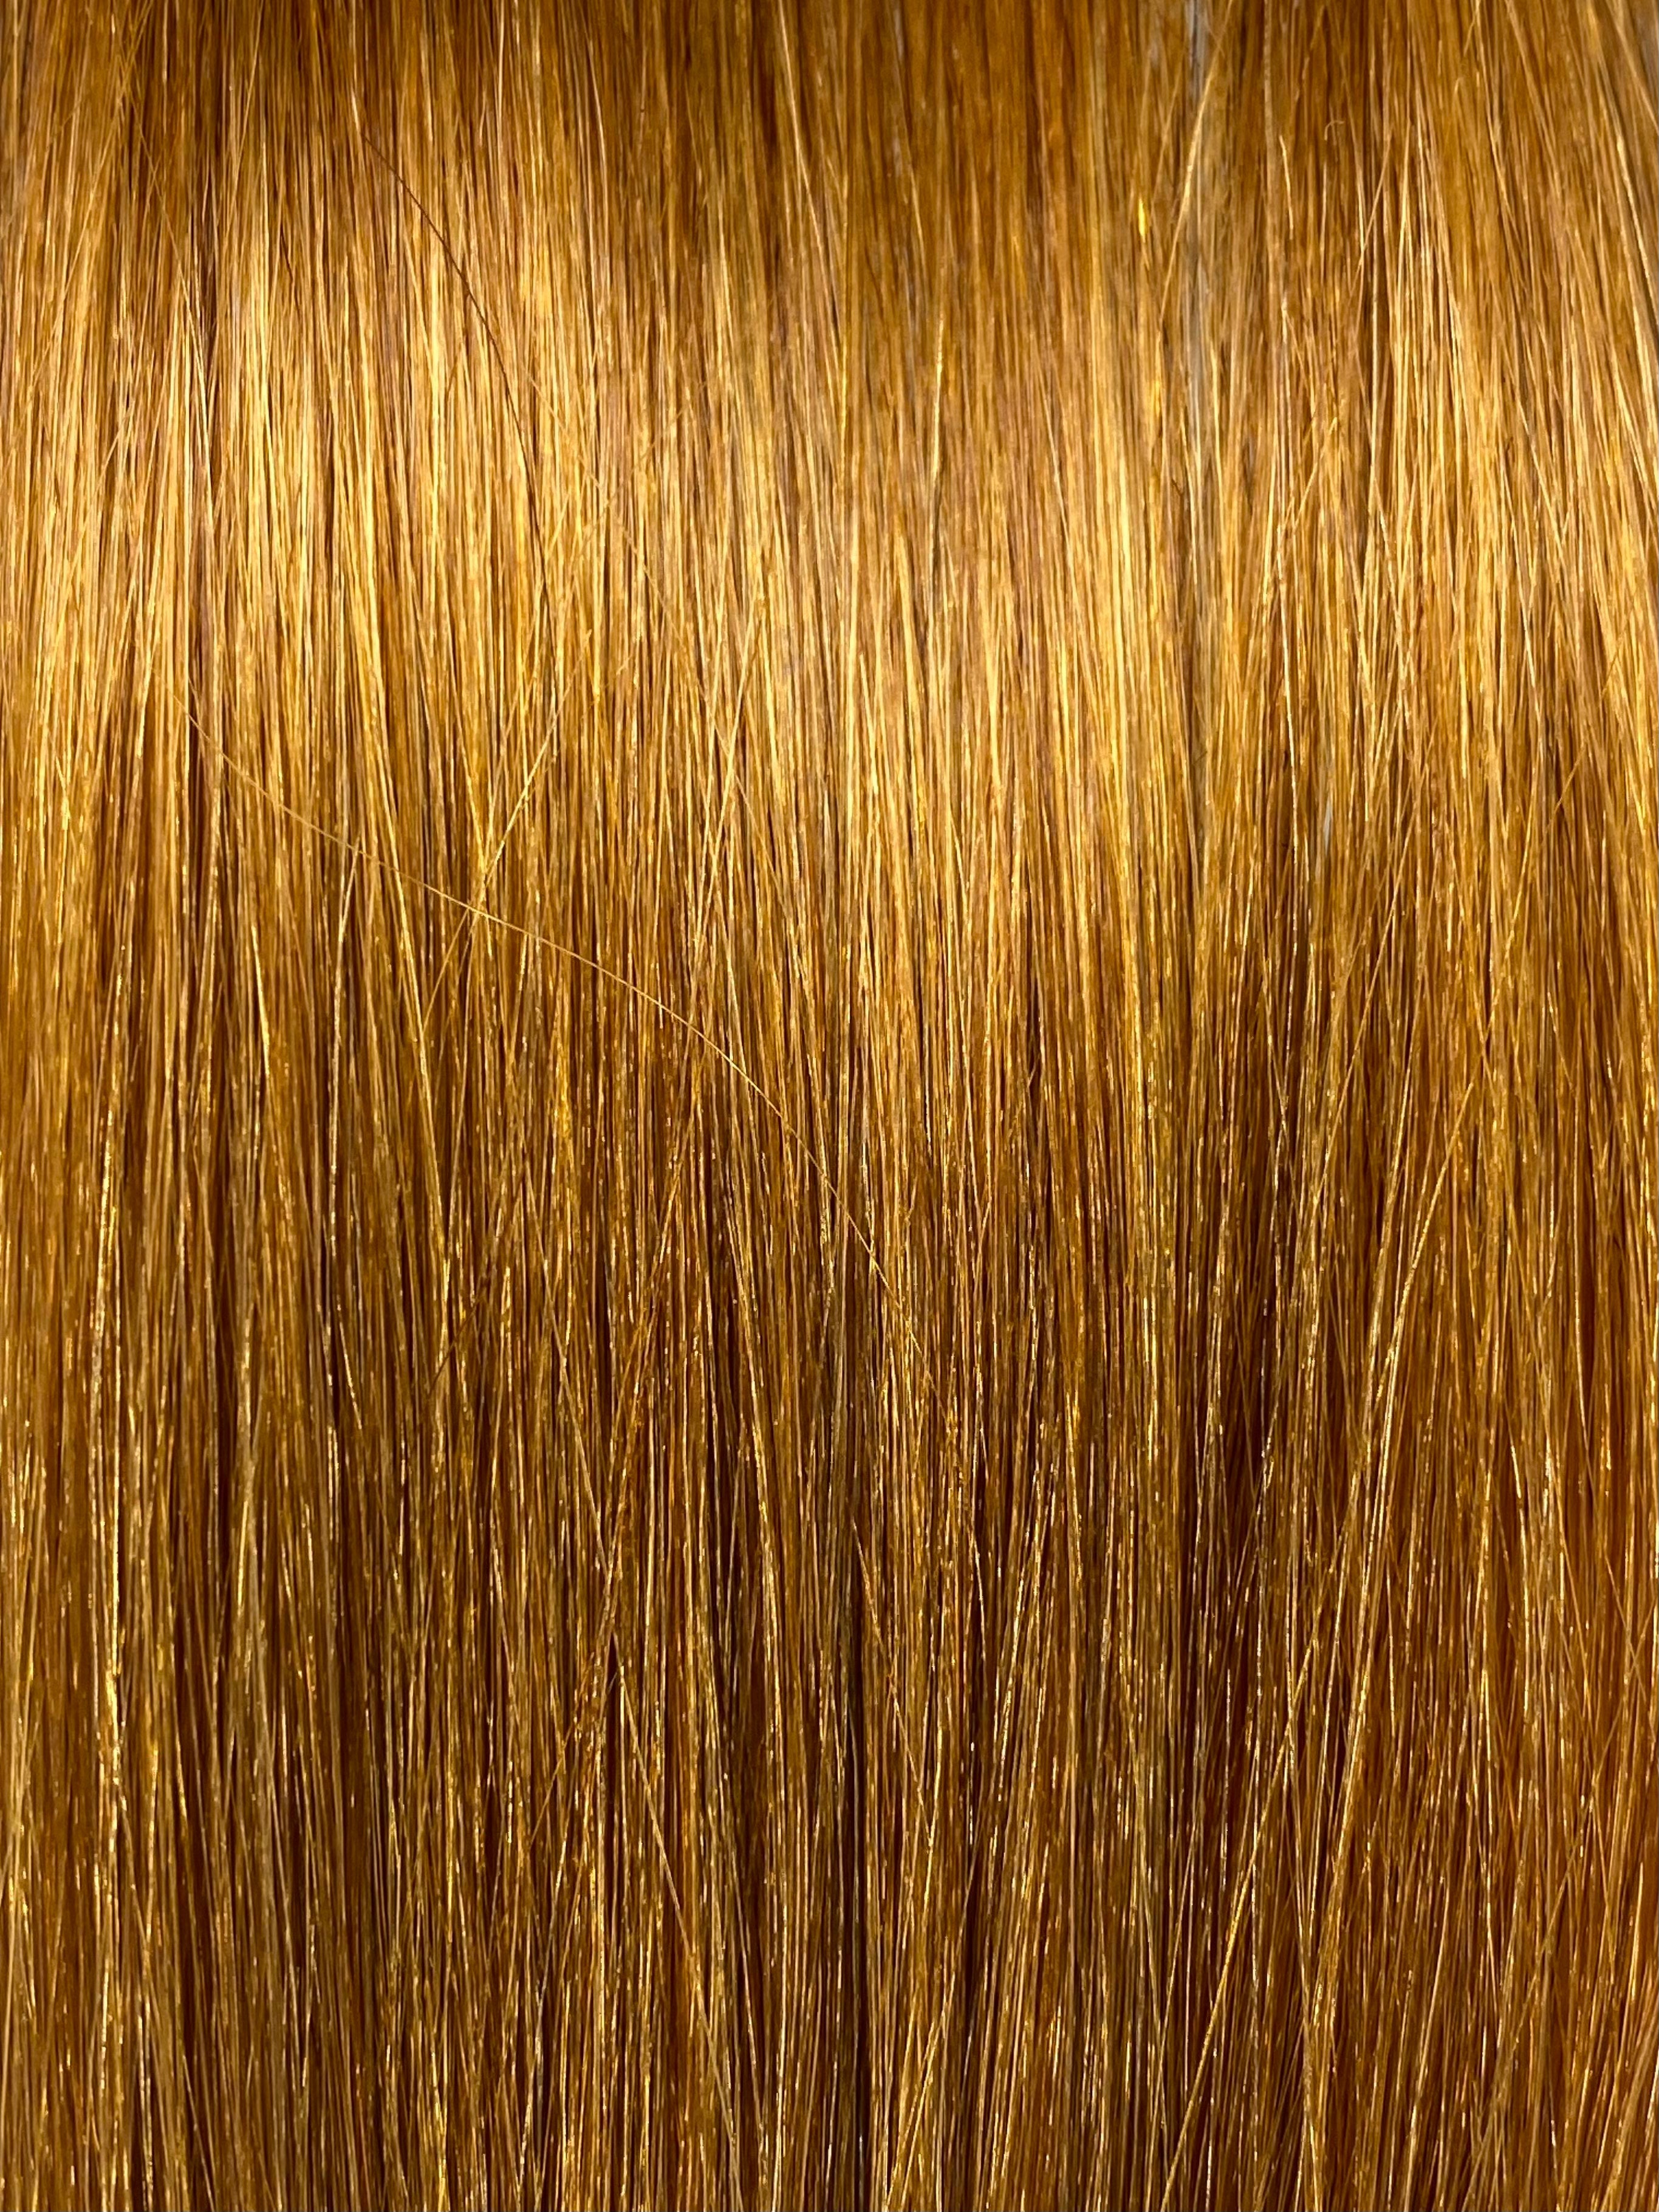 FUSION #27 GOLDEN BLONDE 50CM/ 20 INCHES  -  20 GRAMS